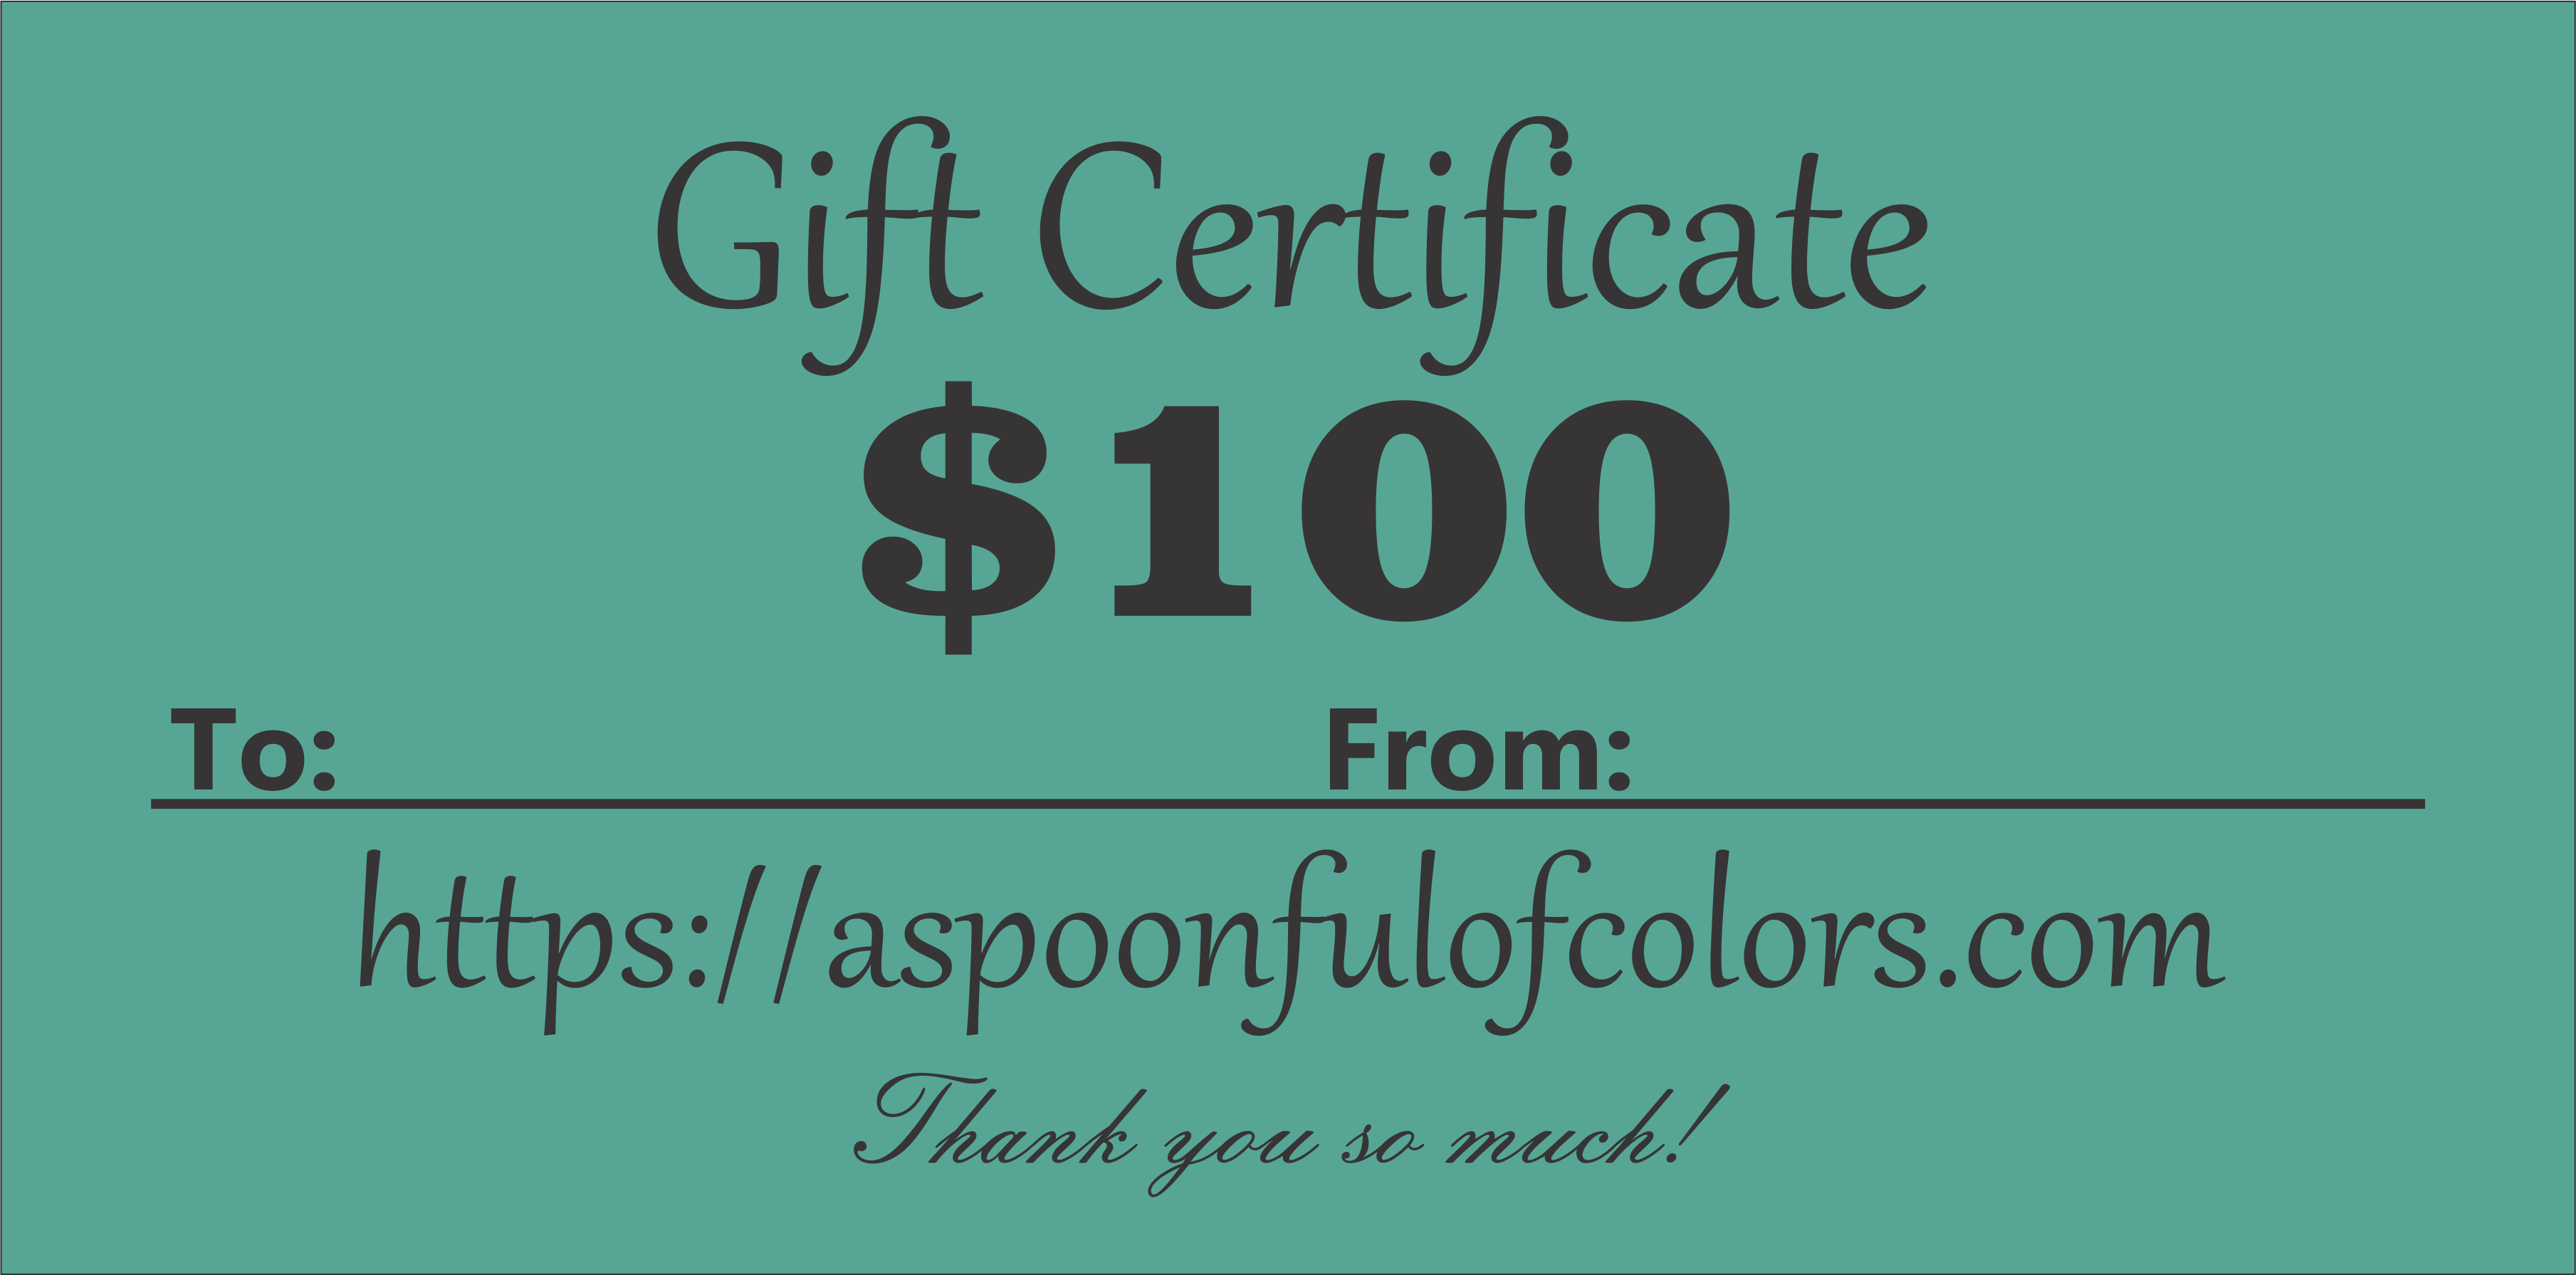 Gift Certificate $100 Value